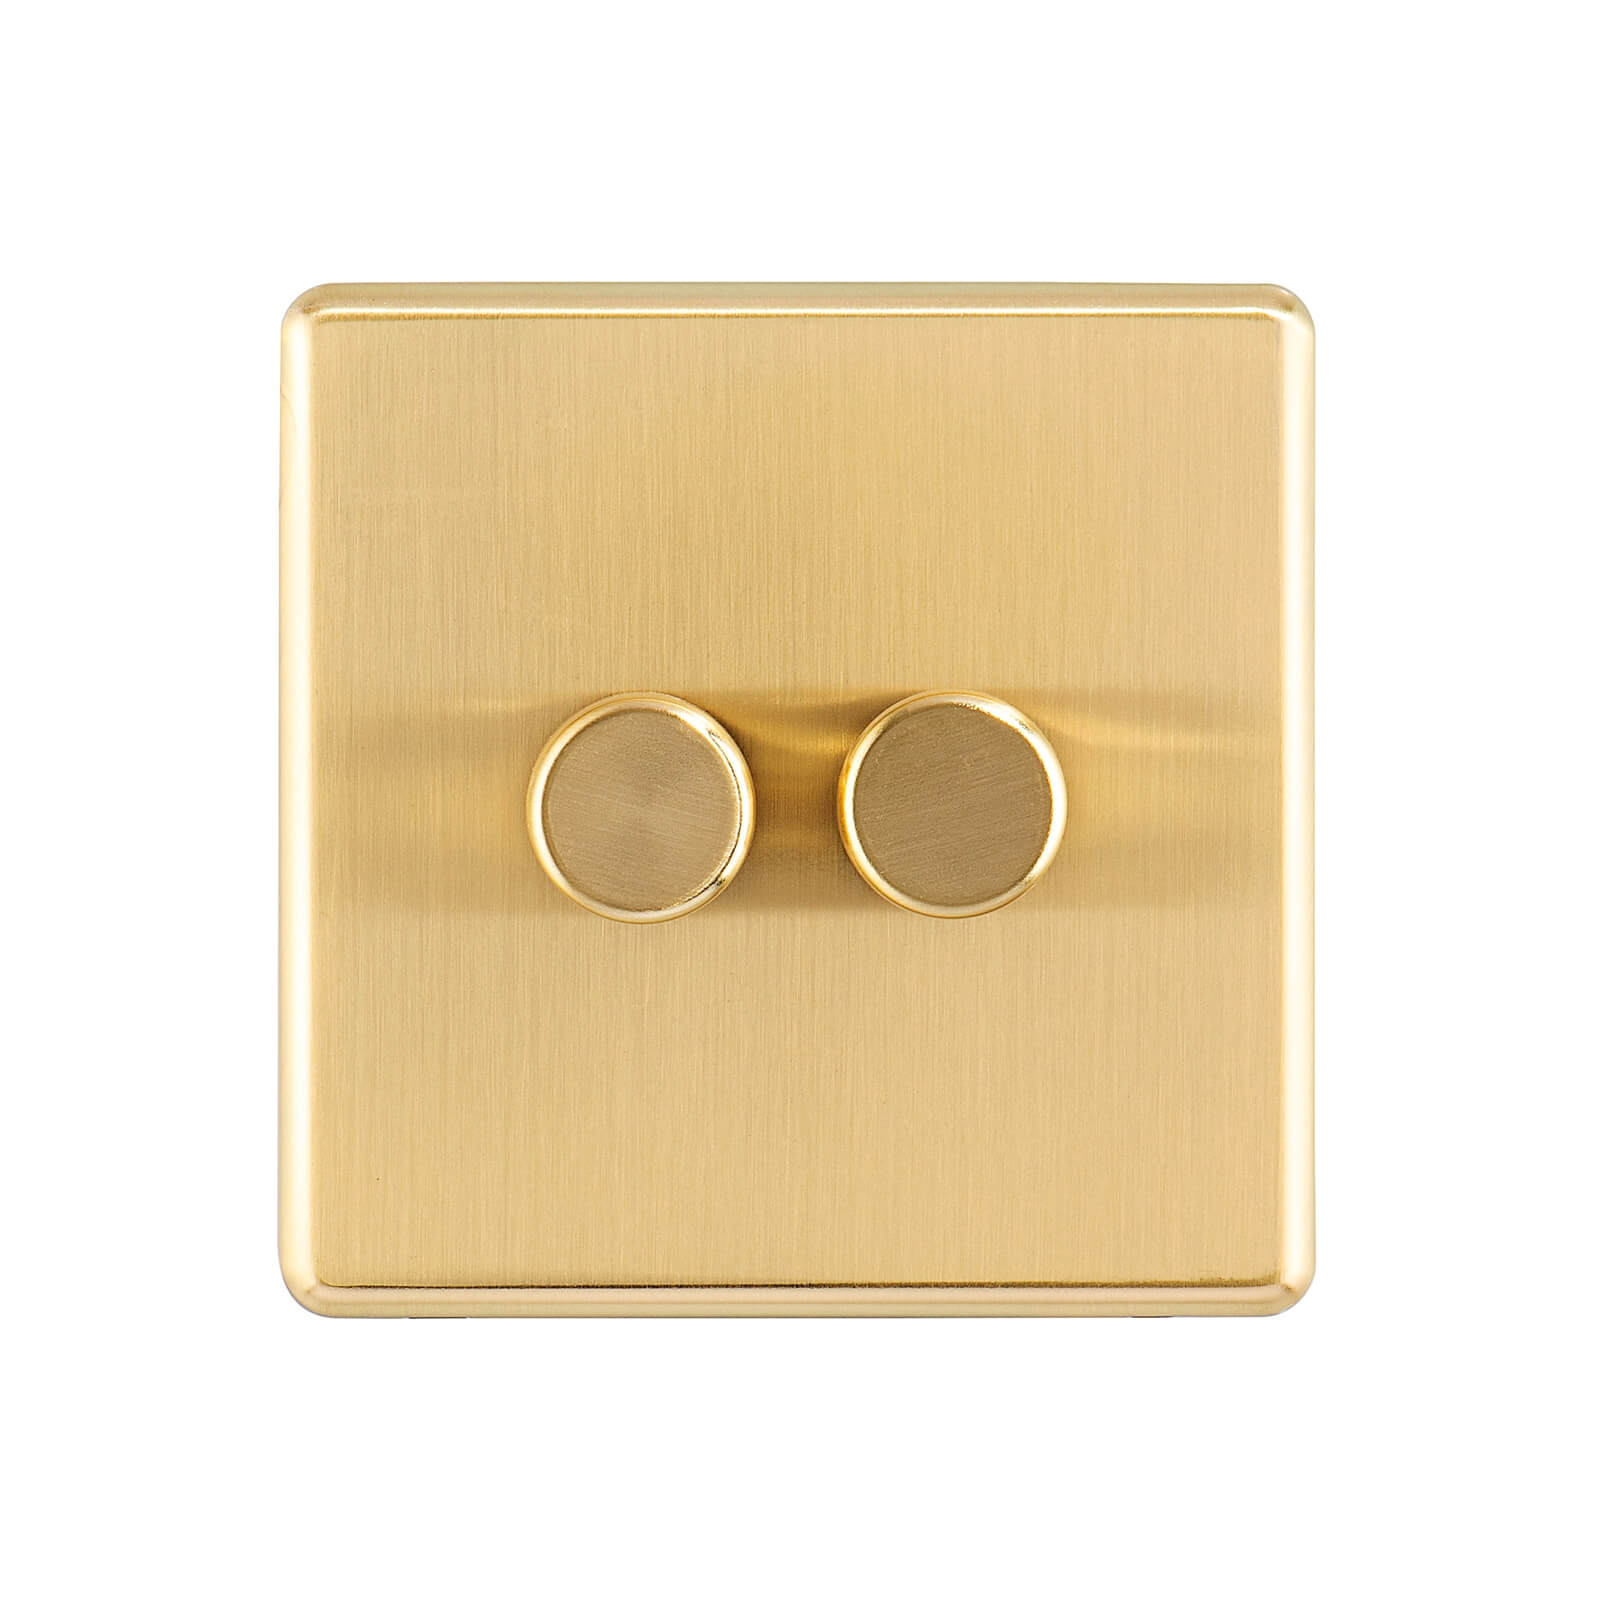 Arlec Fusion 2 Gang 2 Way Gold Dimmer switch